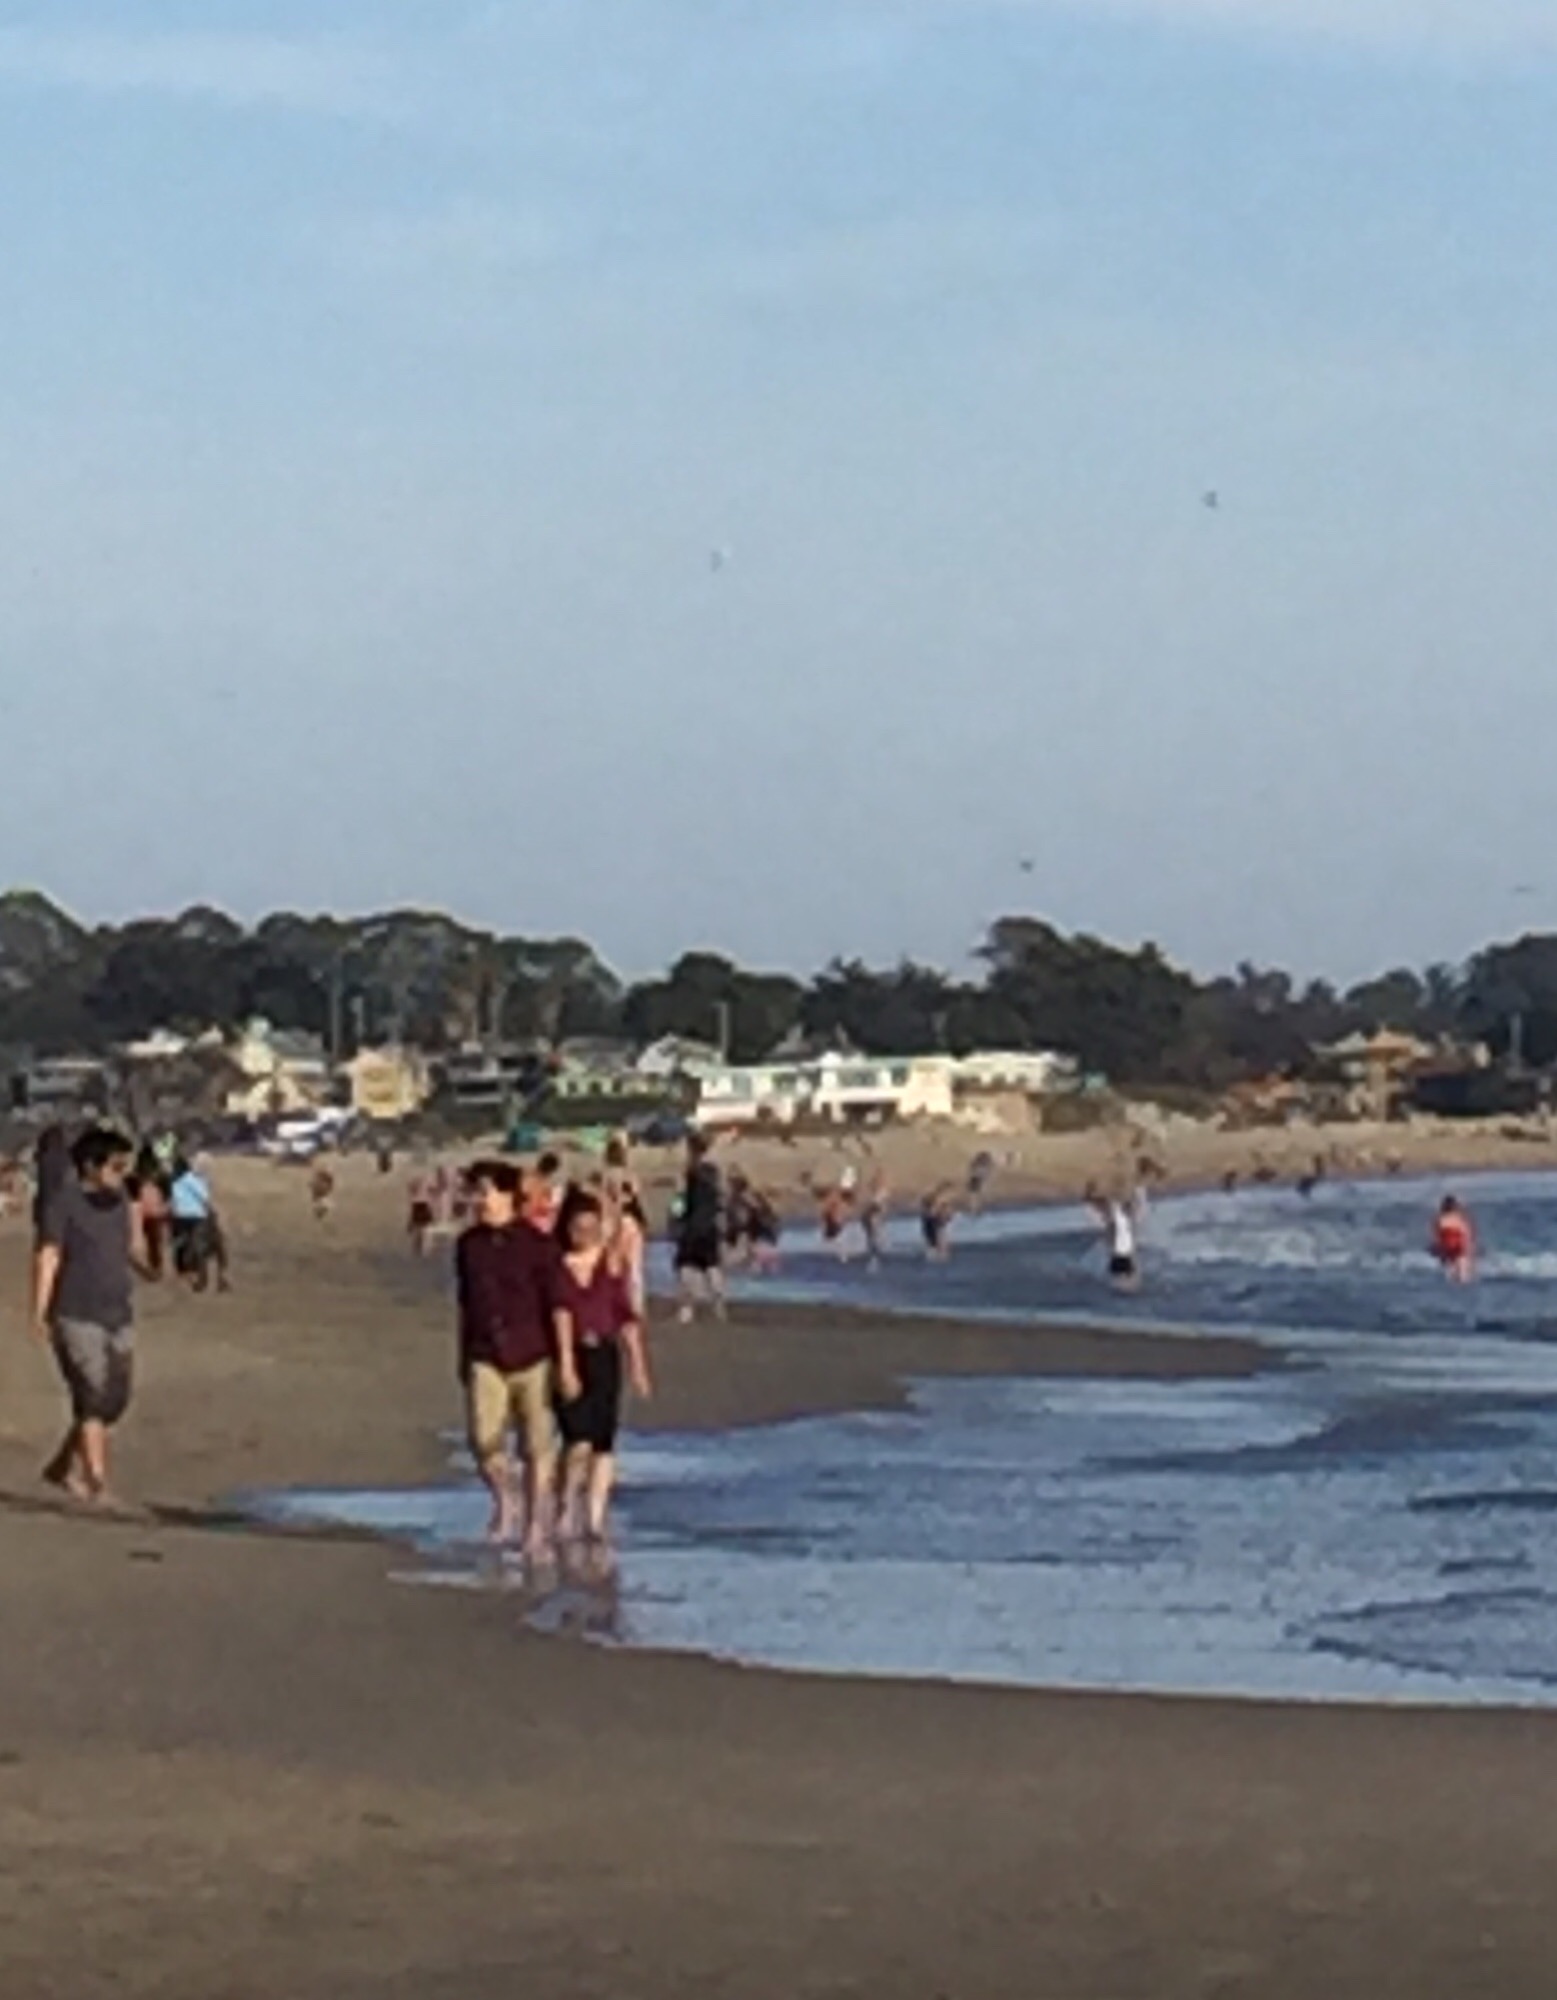 An image of the beach with several people walking barefoot in the distance.